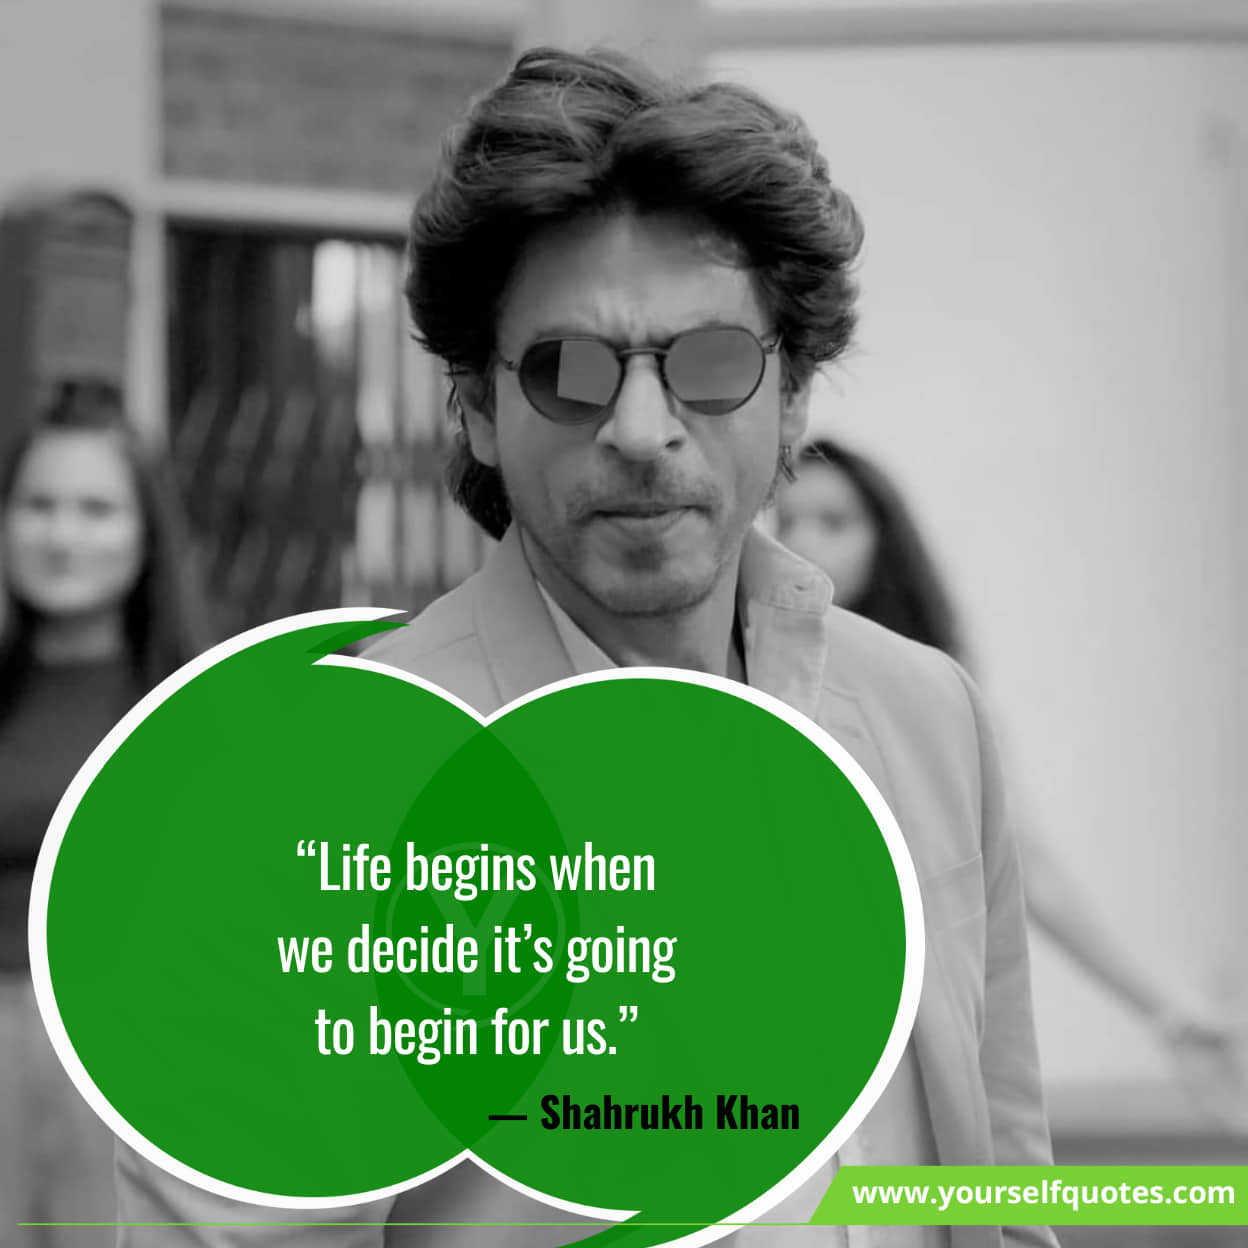 Shahrukh Khan quotes on family and values